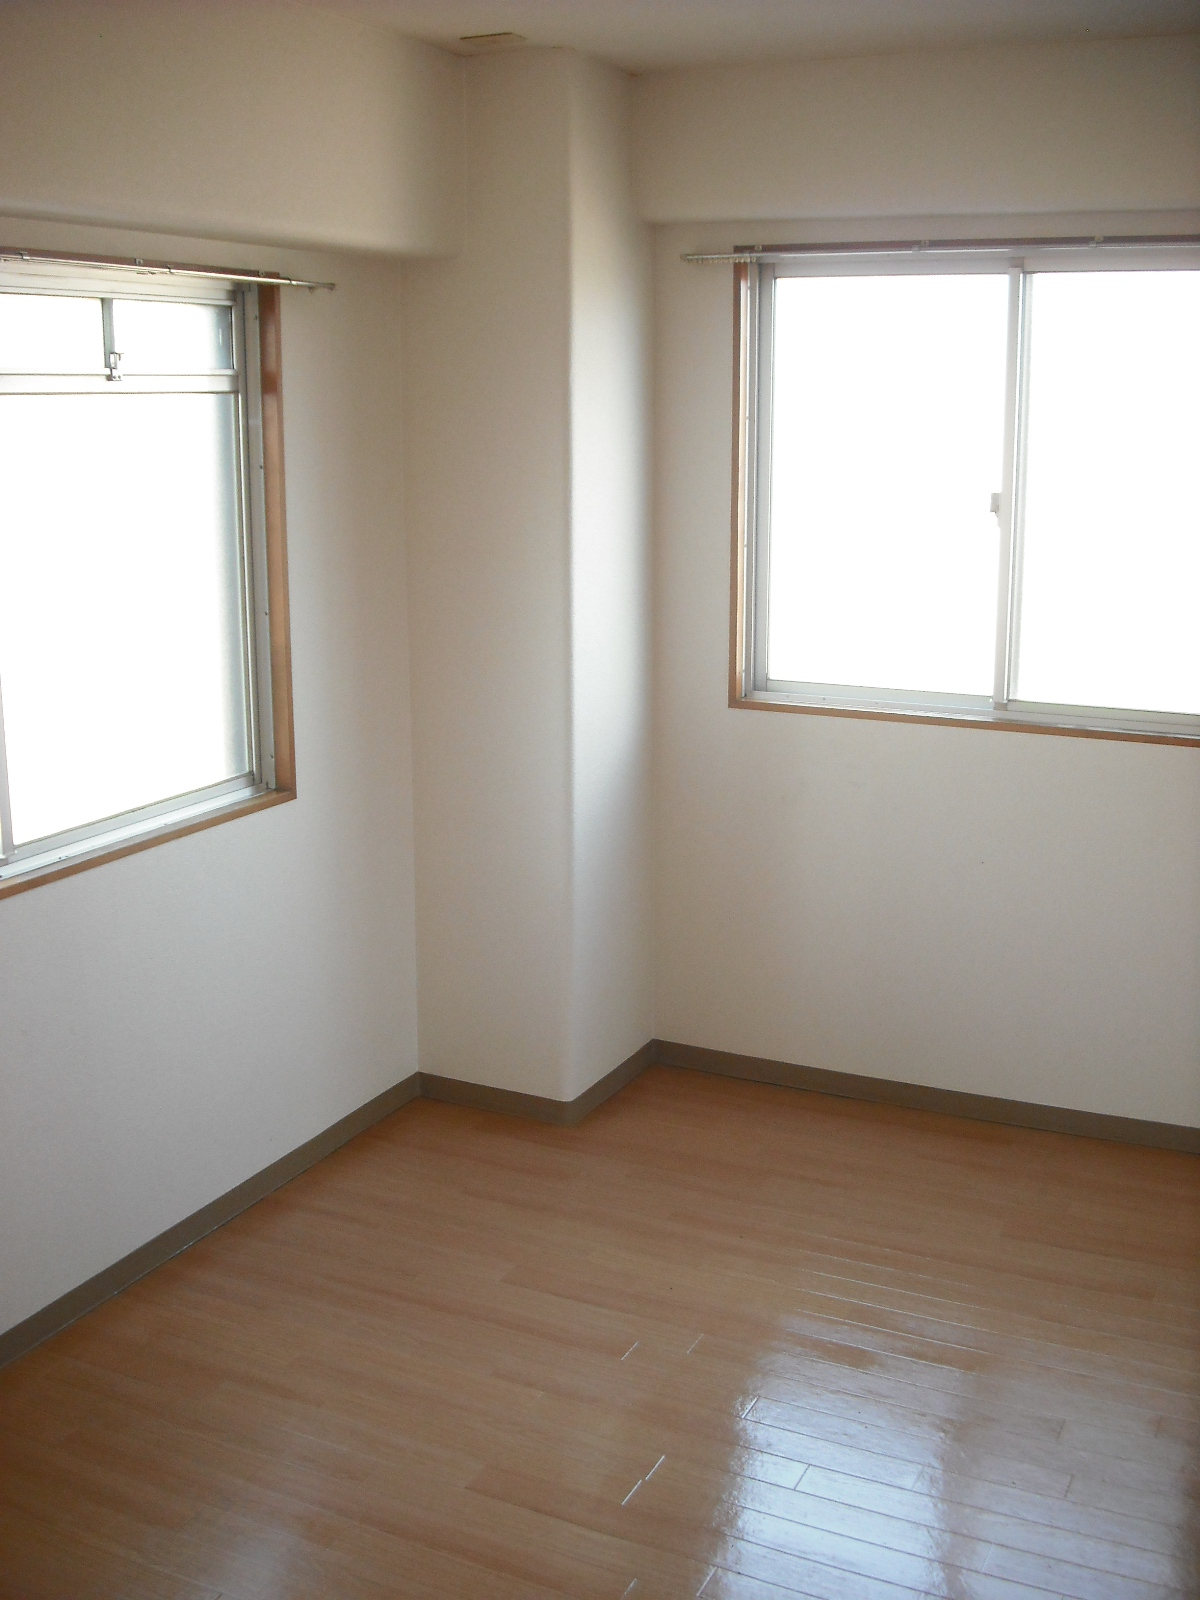 Other room space. North Western-style also windows with 2 places